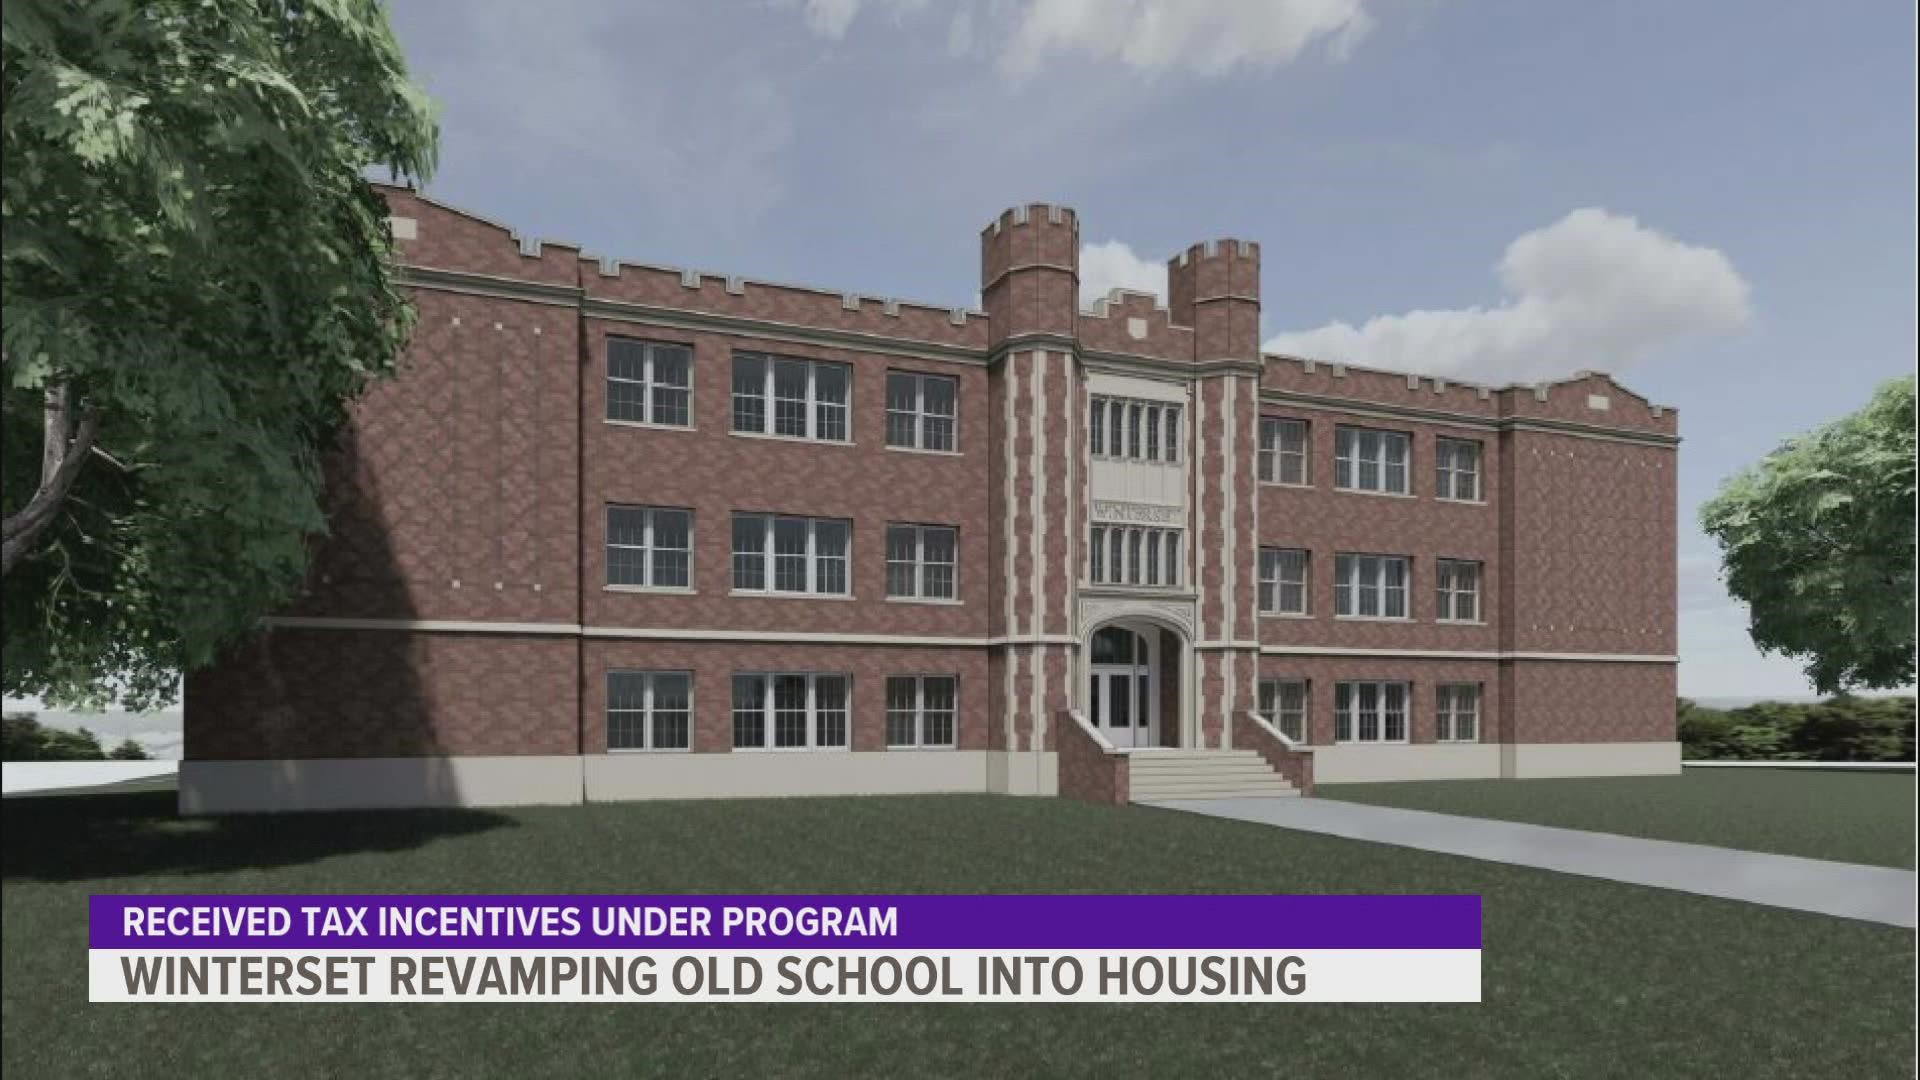 Winterset is planning to revamp an old school into modern apartments off the downtown square.